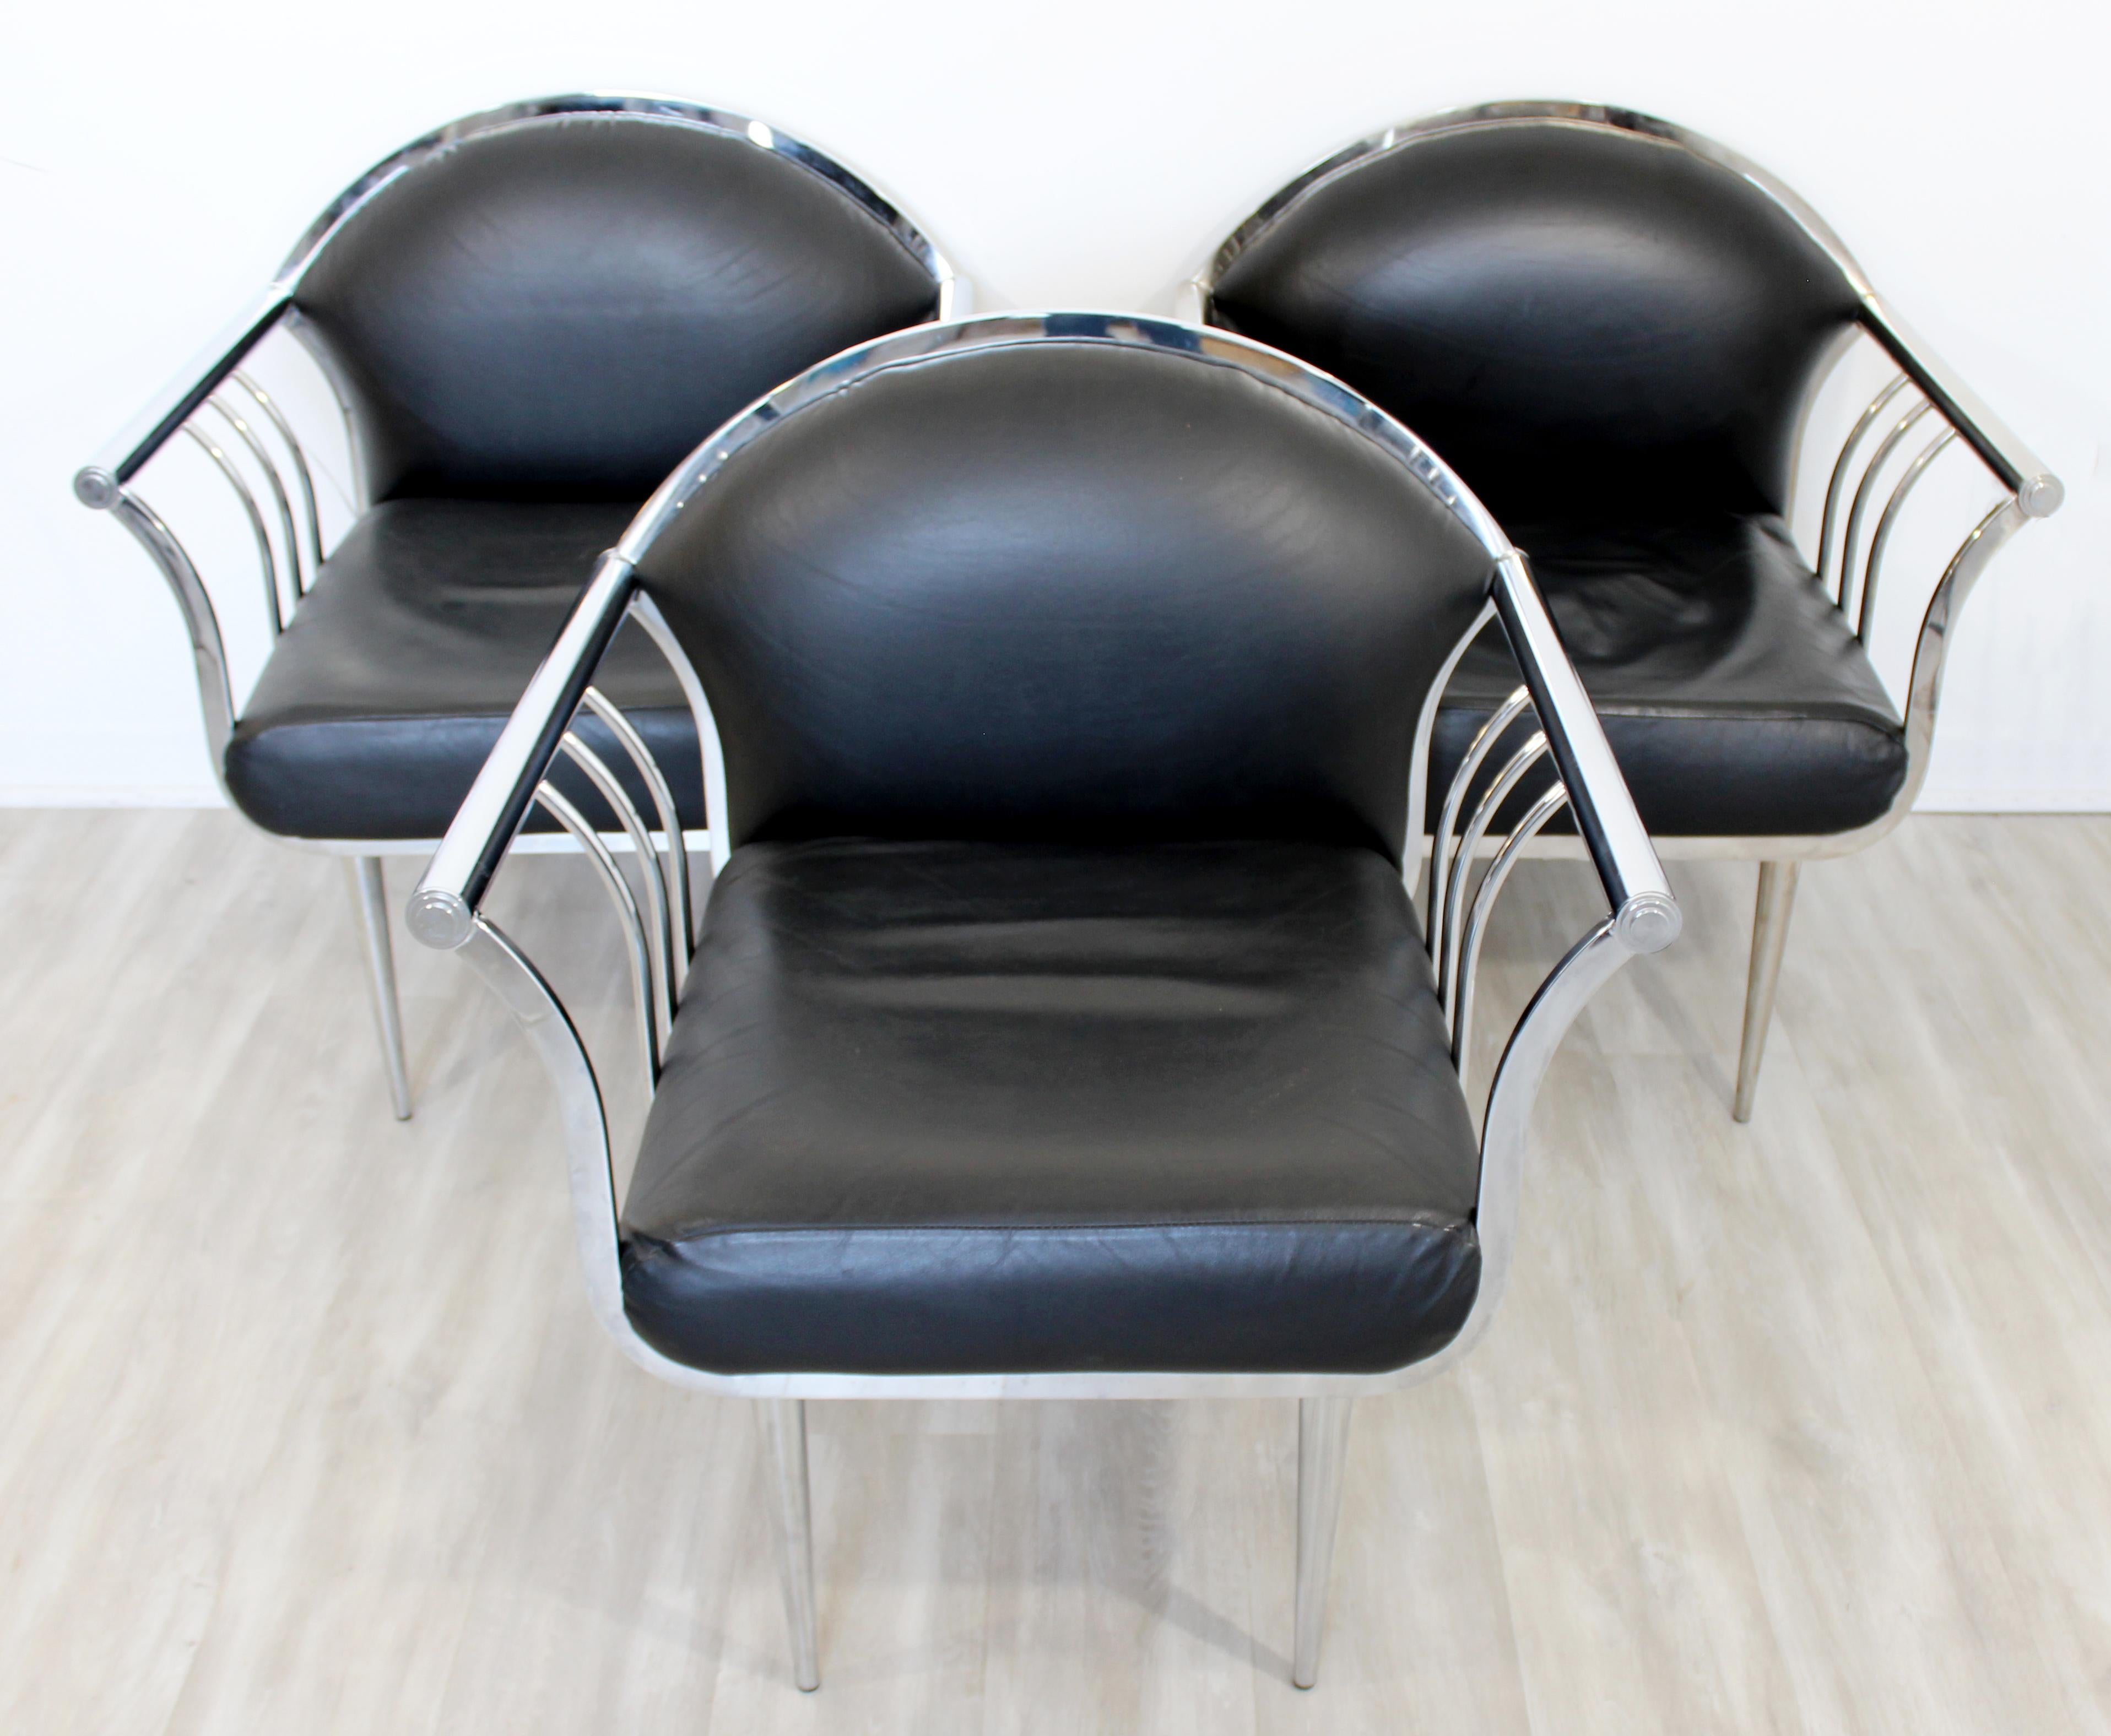 For your consideration is a gorgeous set of three, curved chrome and vinyl lounge or accent chairs, circa 1950s-1960s. In very good vintage condition. The dimensions are 28.5